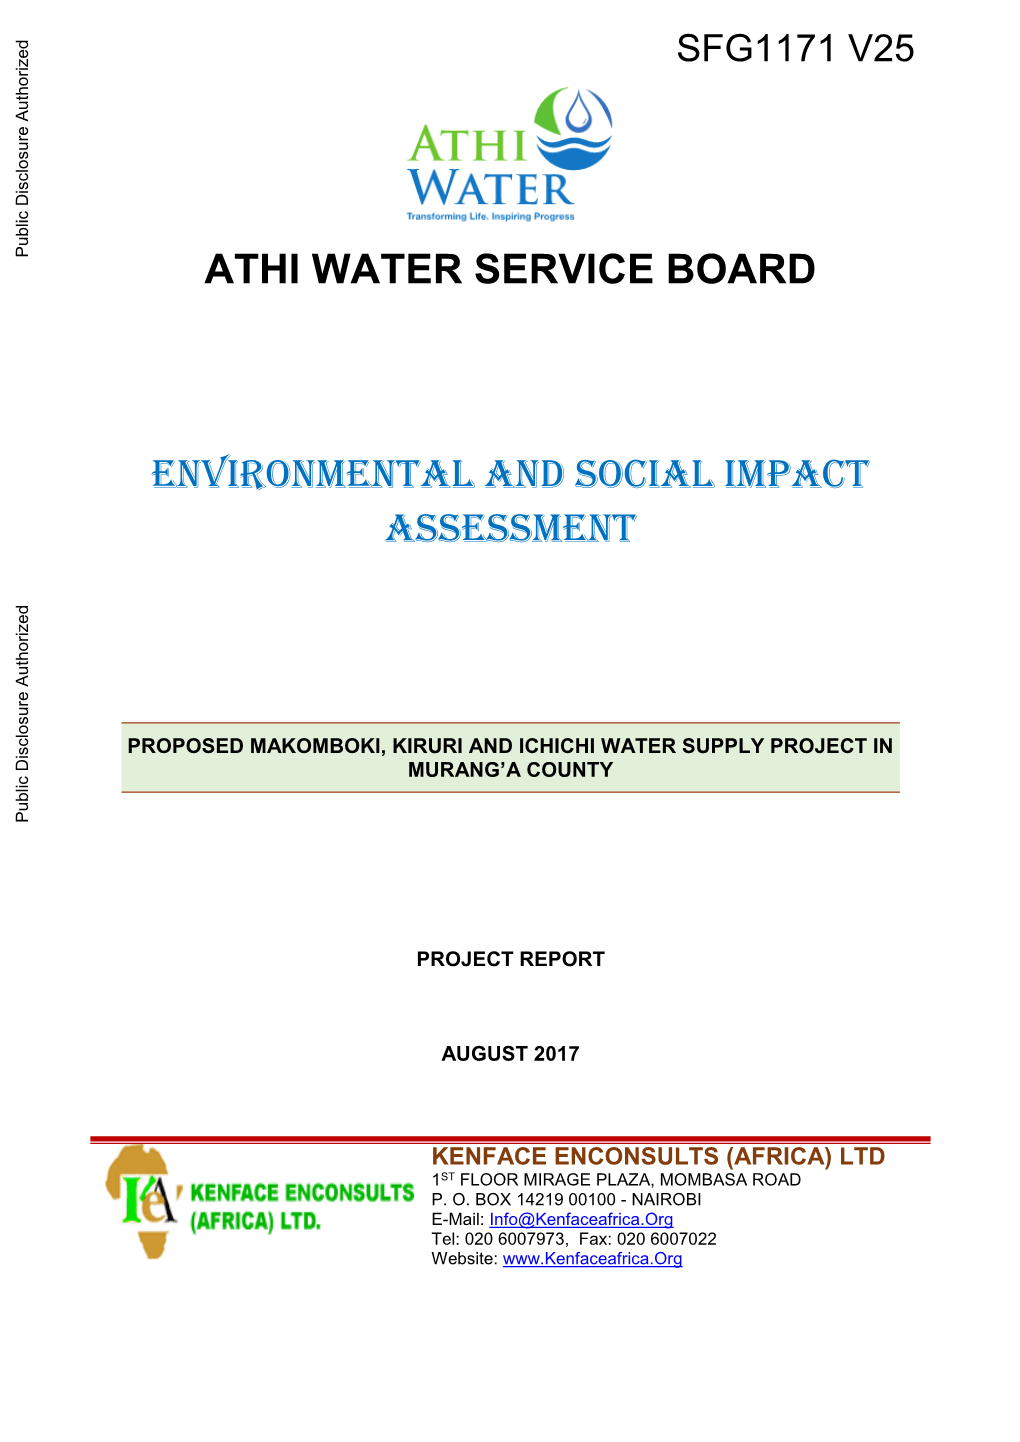 Athi Water Service Board